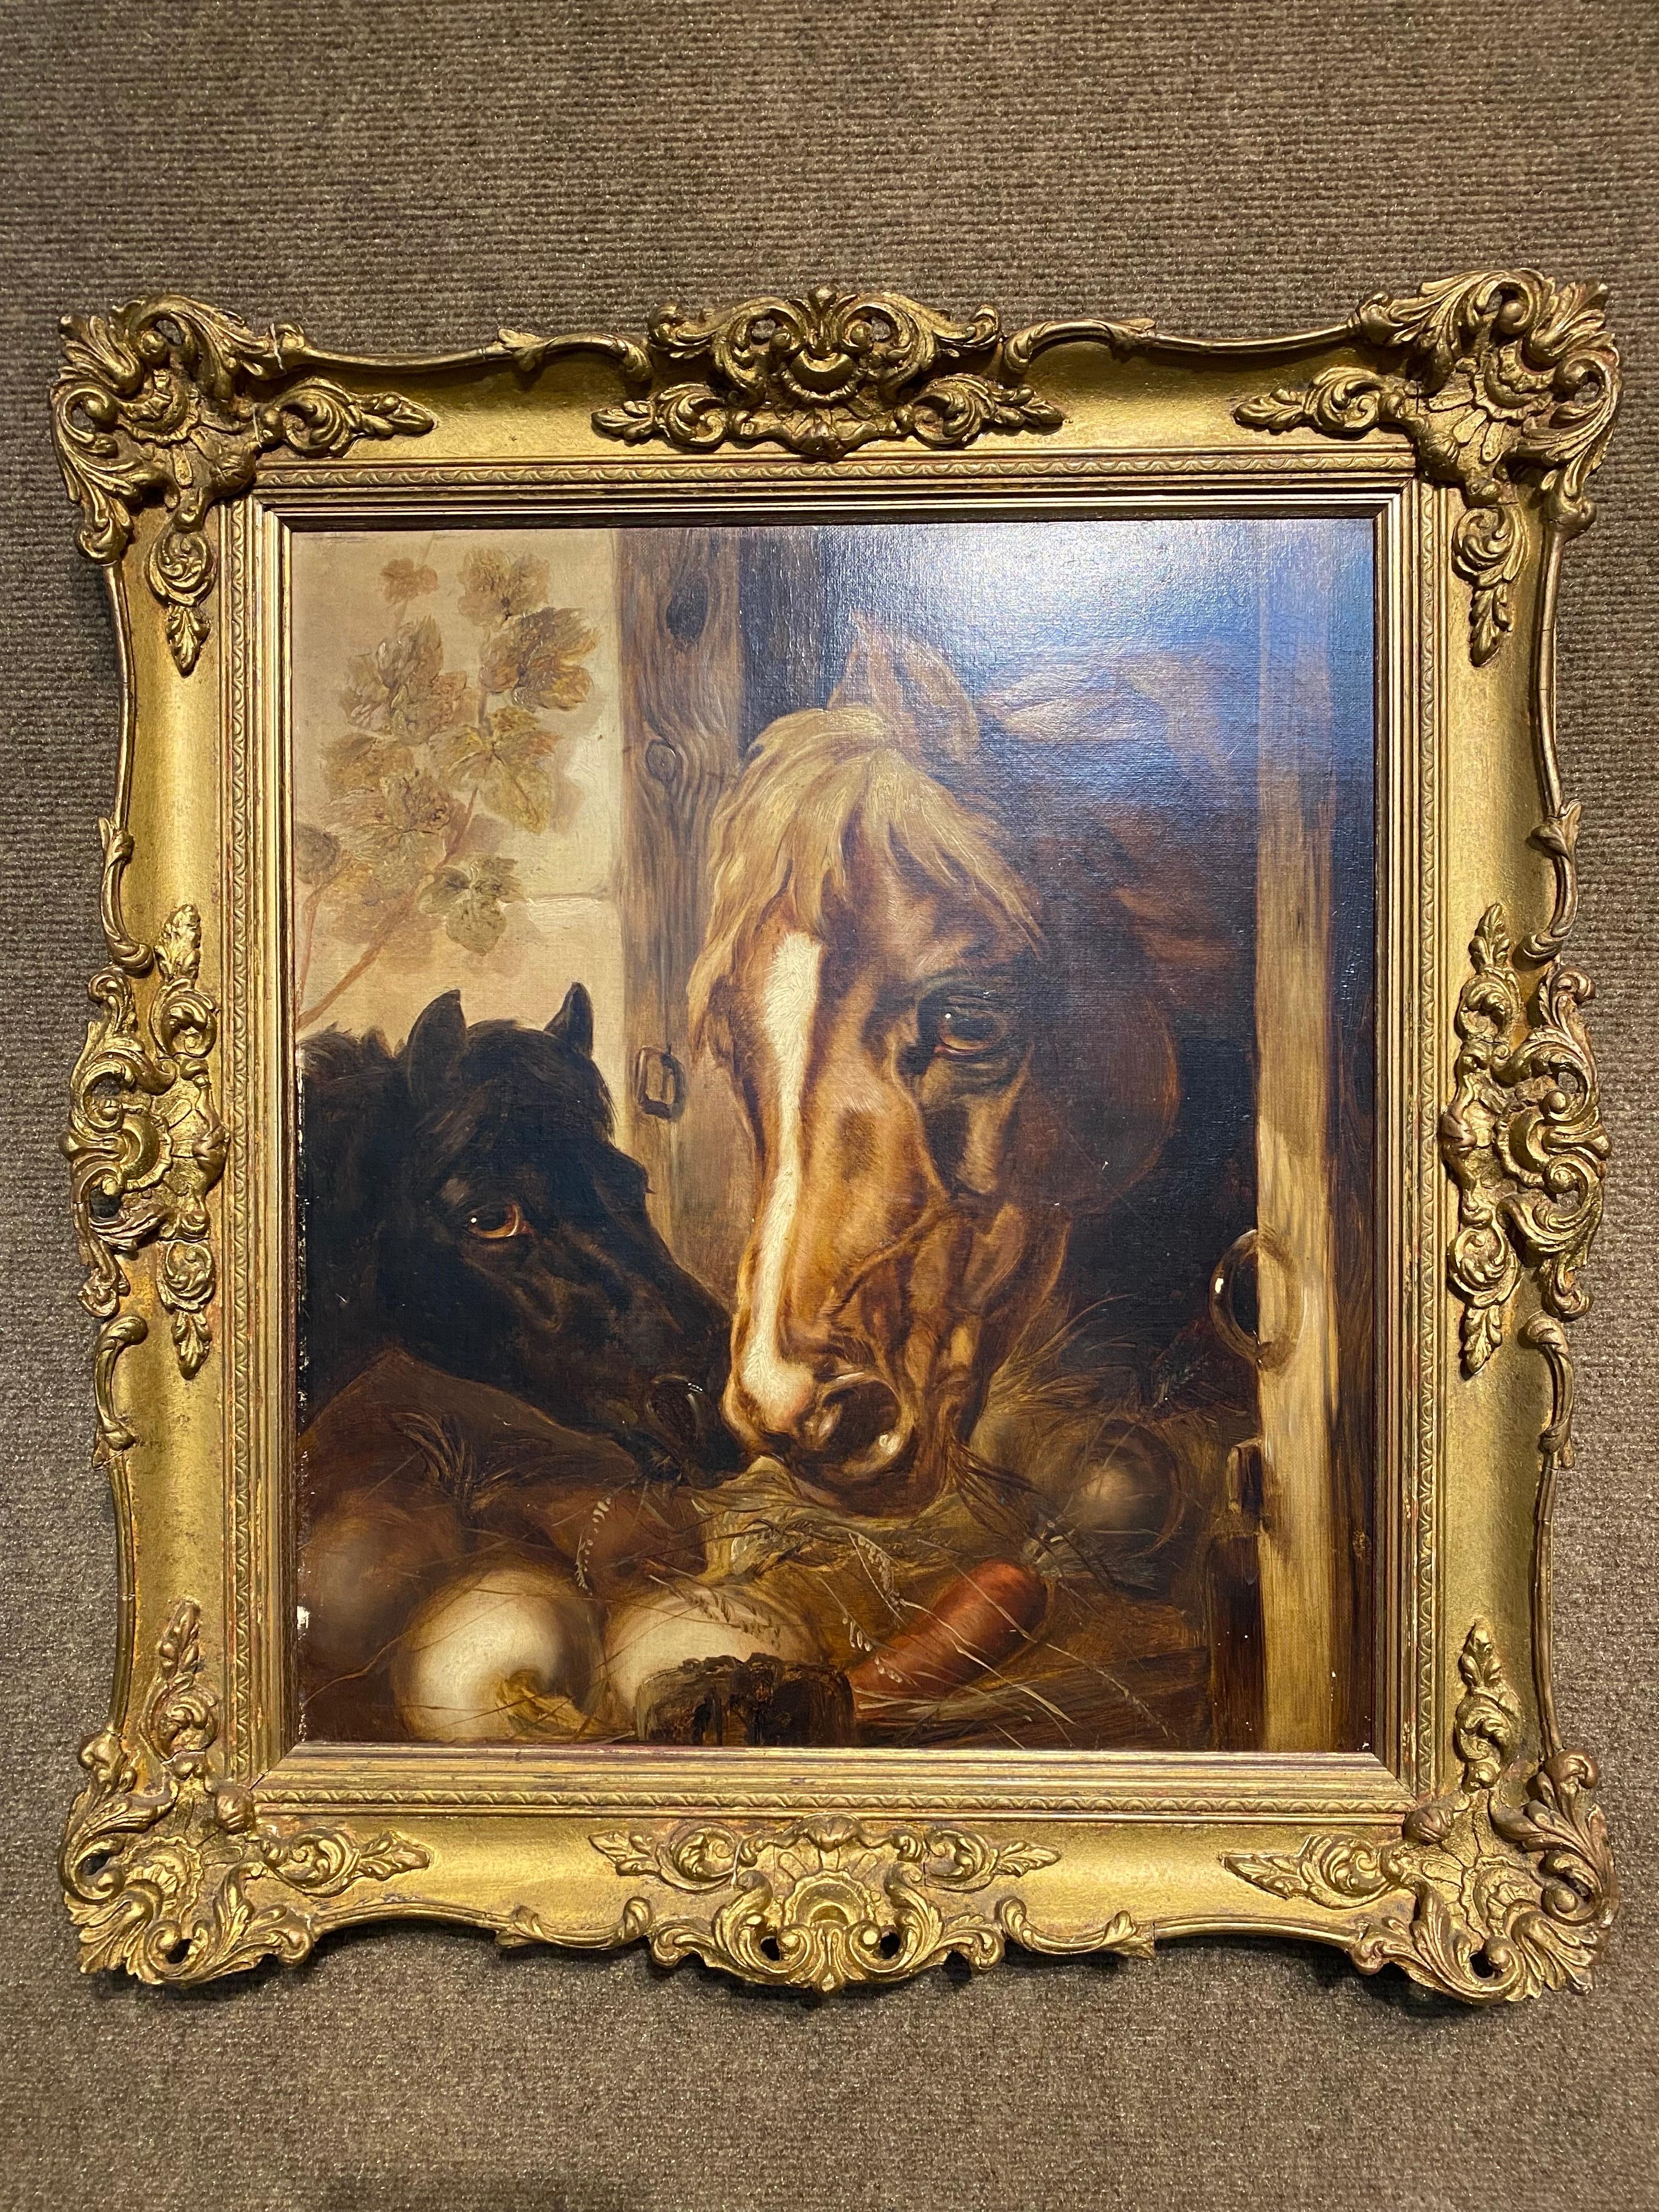 A Pair of Antique Oil/Canvas Paintings Depicting Horse and Mare, signed on each painting, bottom left hand side. Both with identical frames. light scruff to one painting near the framed border. Otherwise excellent condition. Ready to be hung.